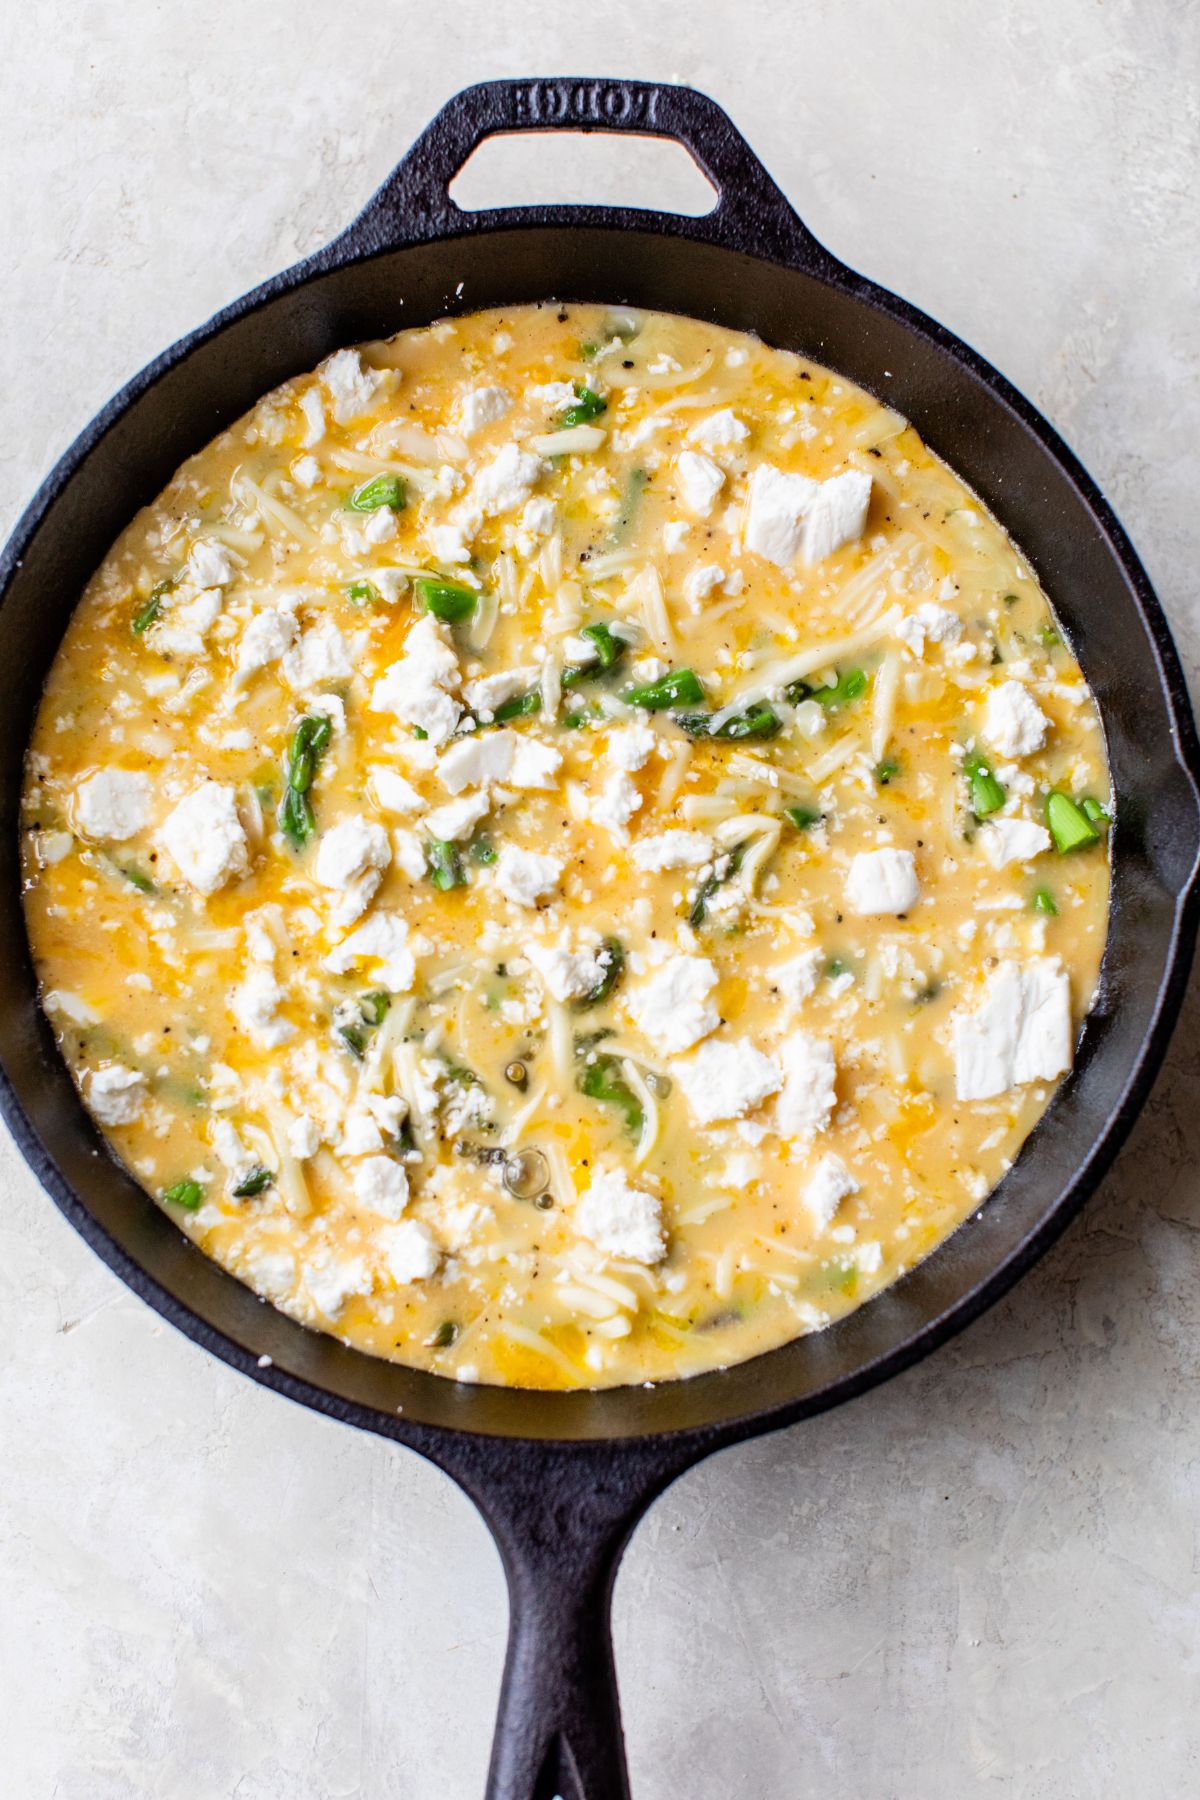 Sprinkling cheese over eggs cooking in a pan.